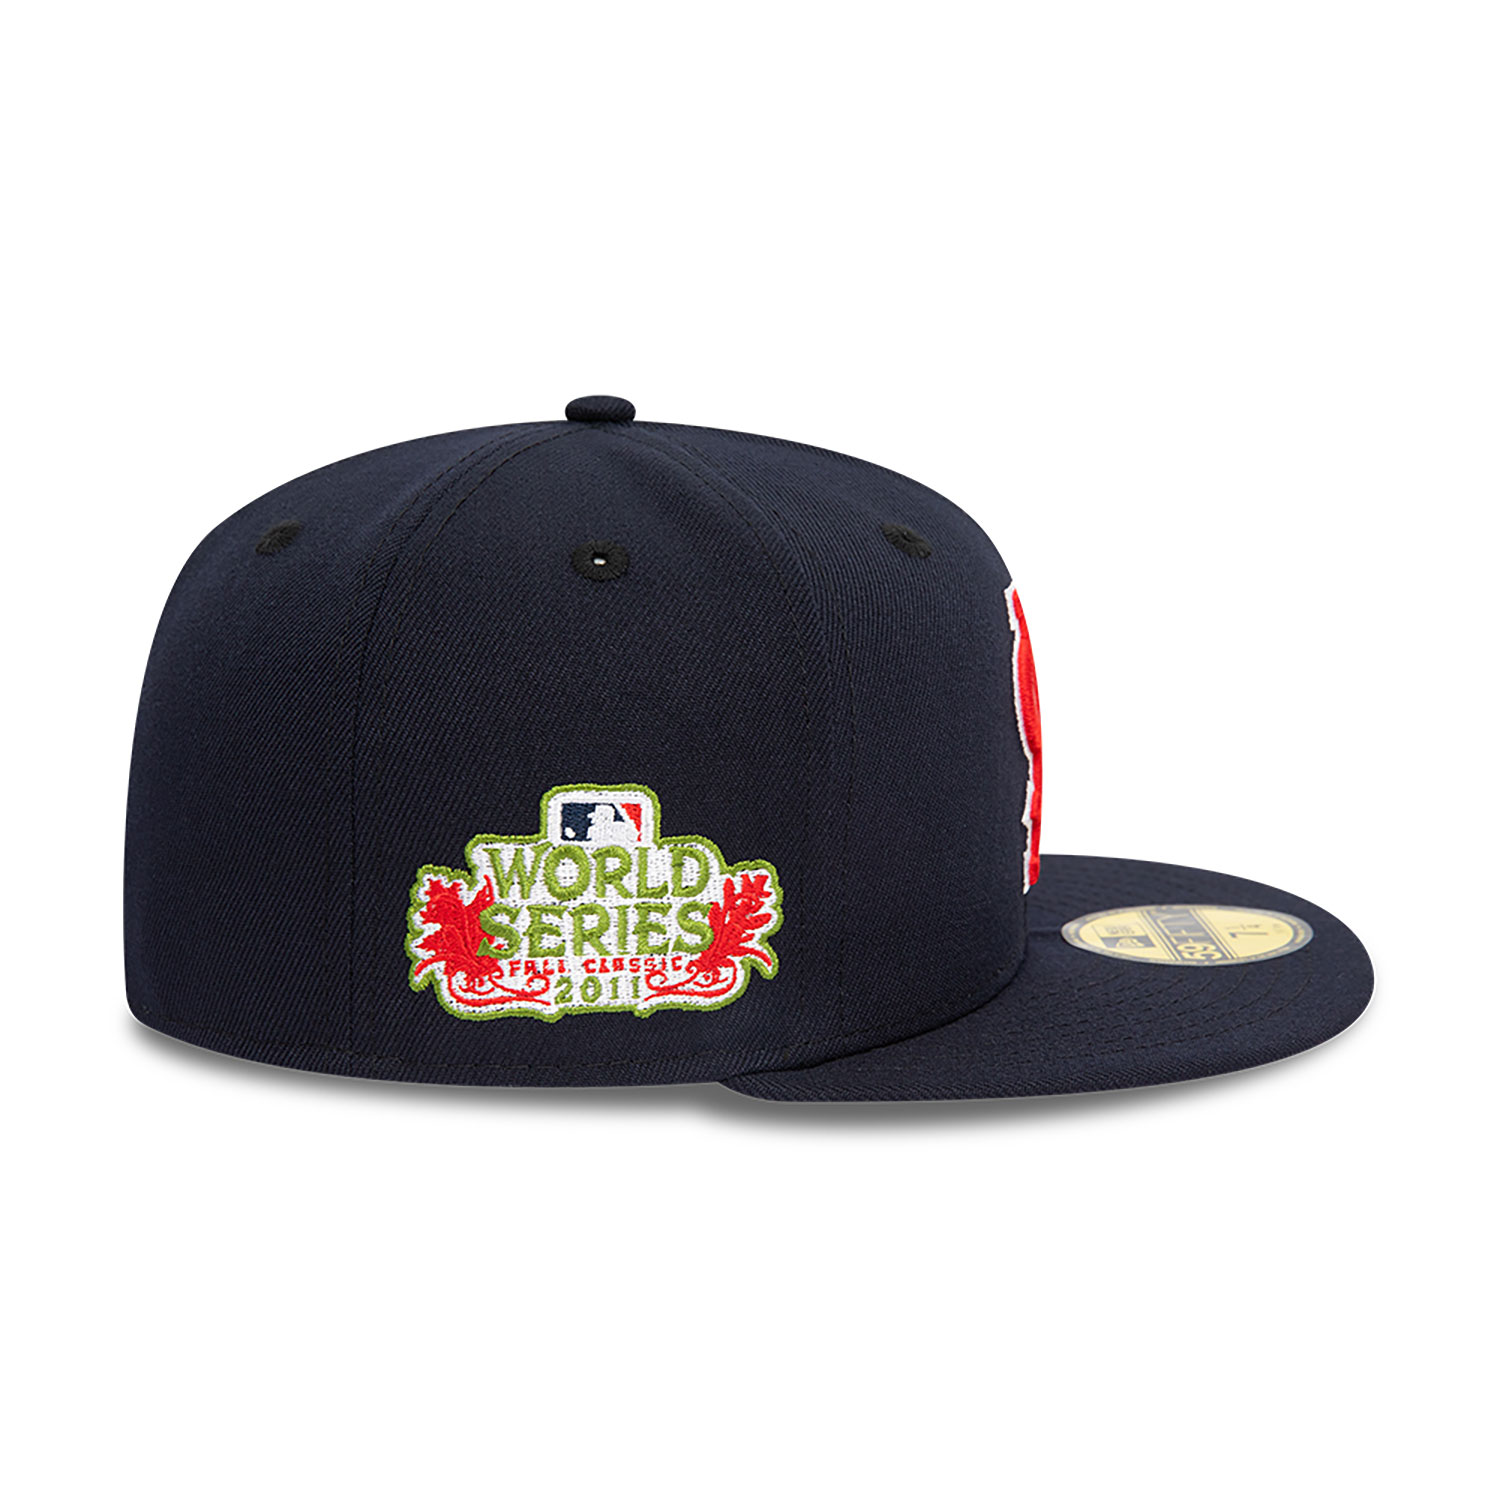 St. Louis Cardinals MLB Floral Navy 59FIFTY Fitted Cap